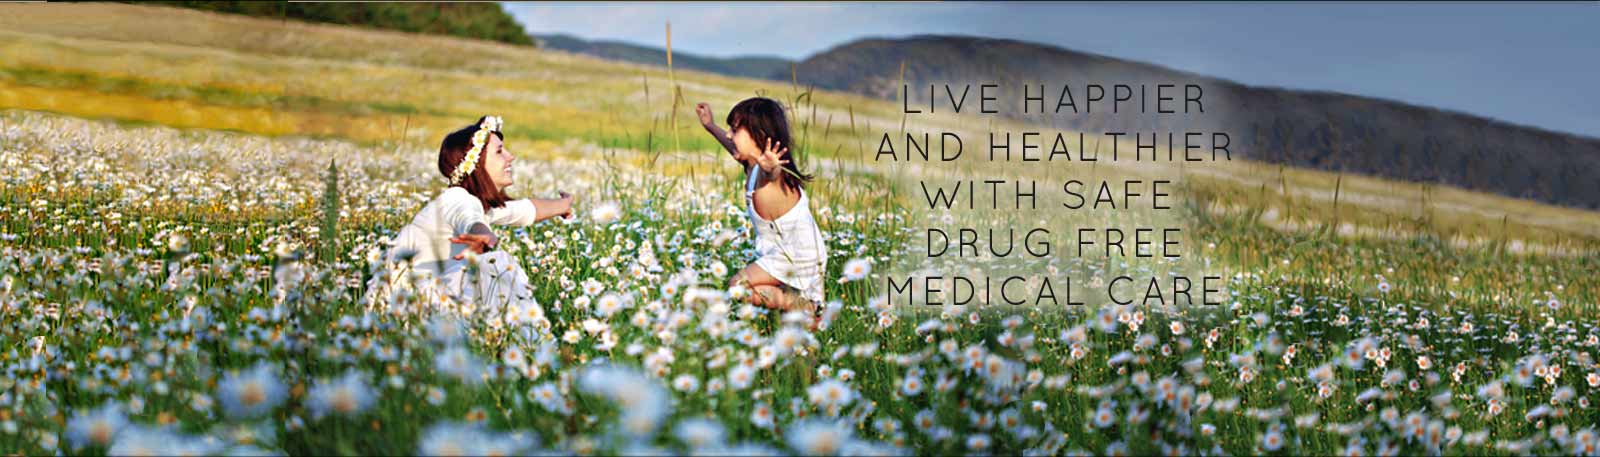 Chiropractic care is drug free